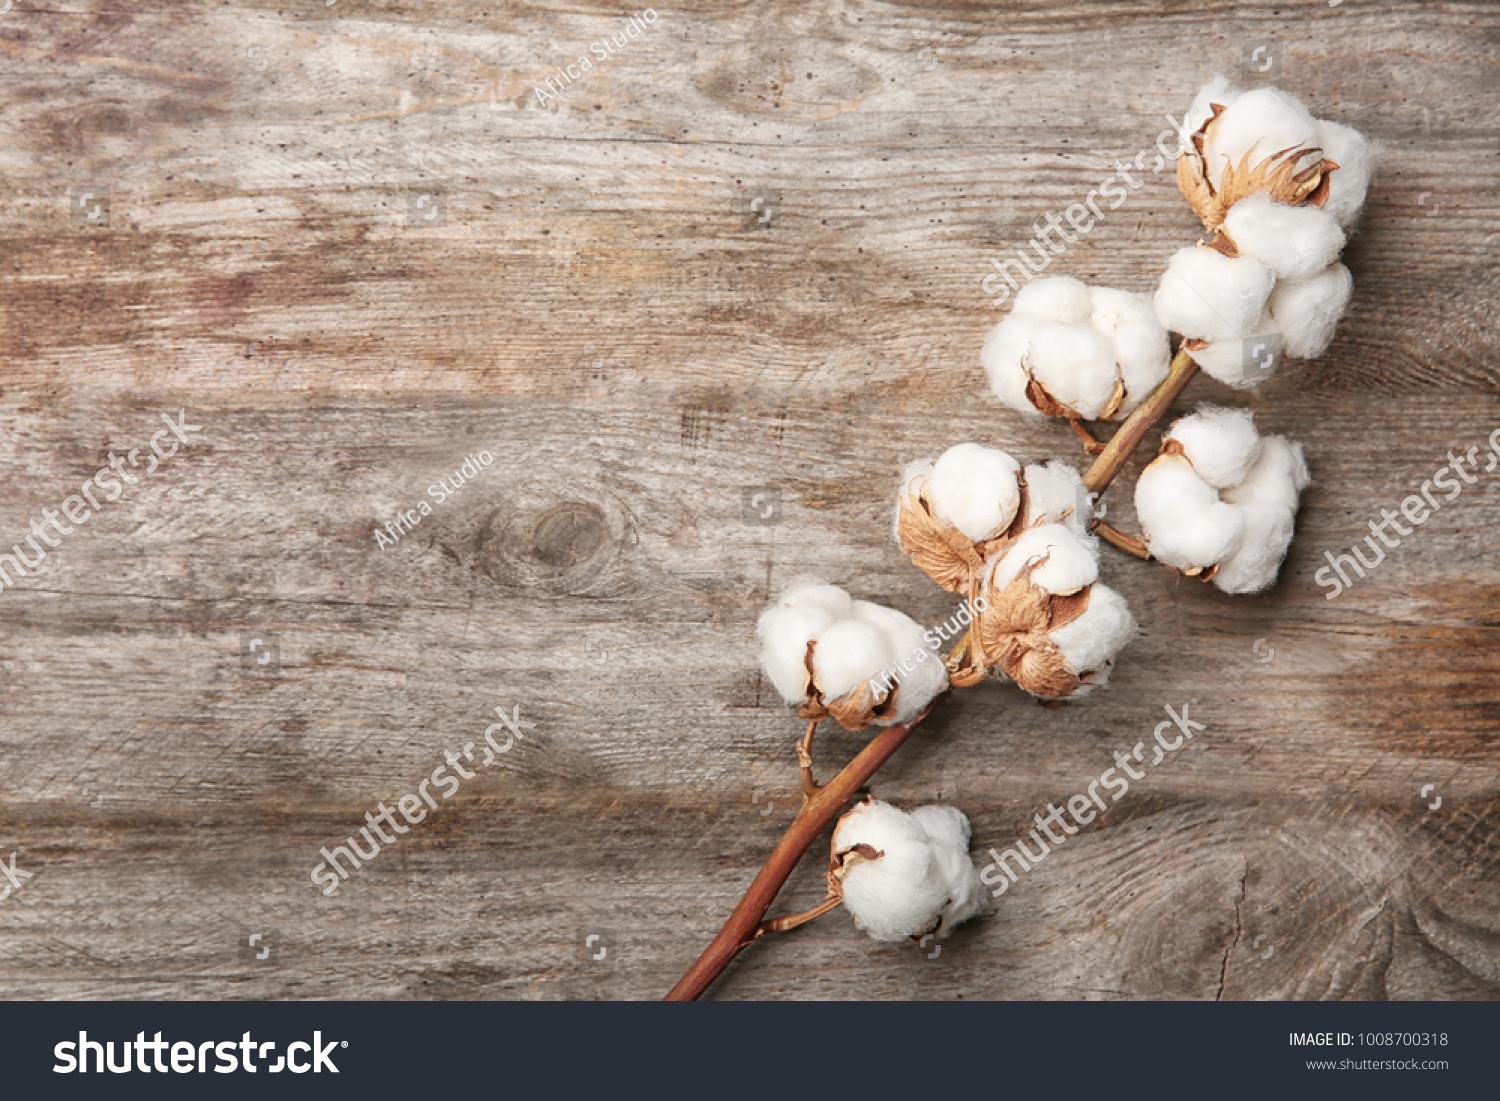 Cotton flowers on wooden background #1008700318